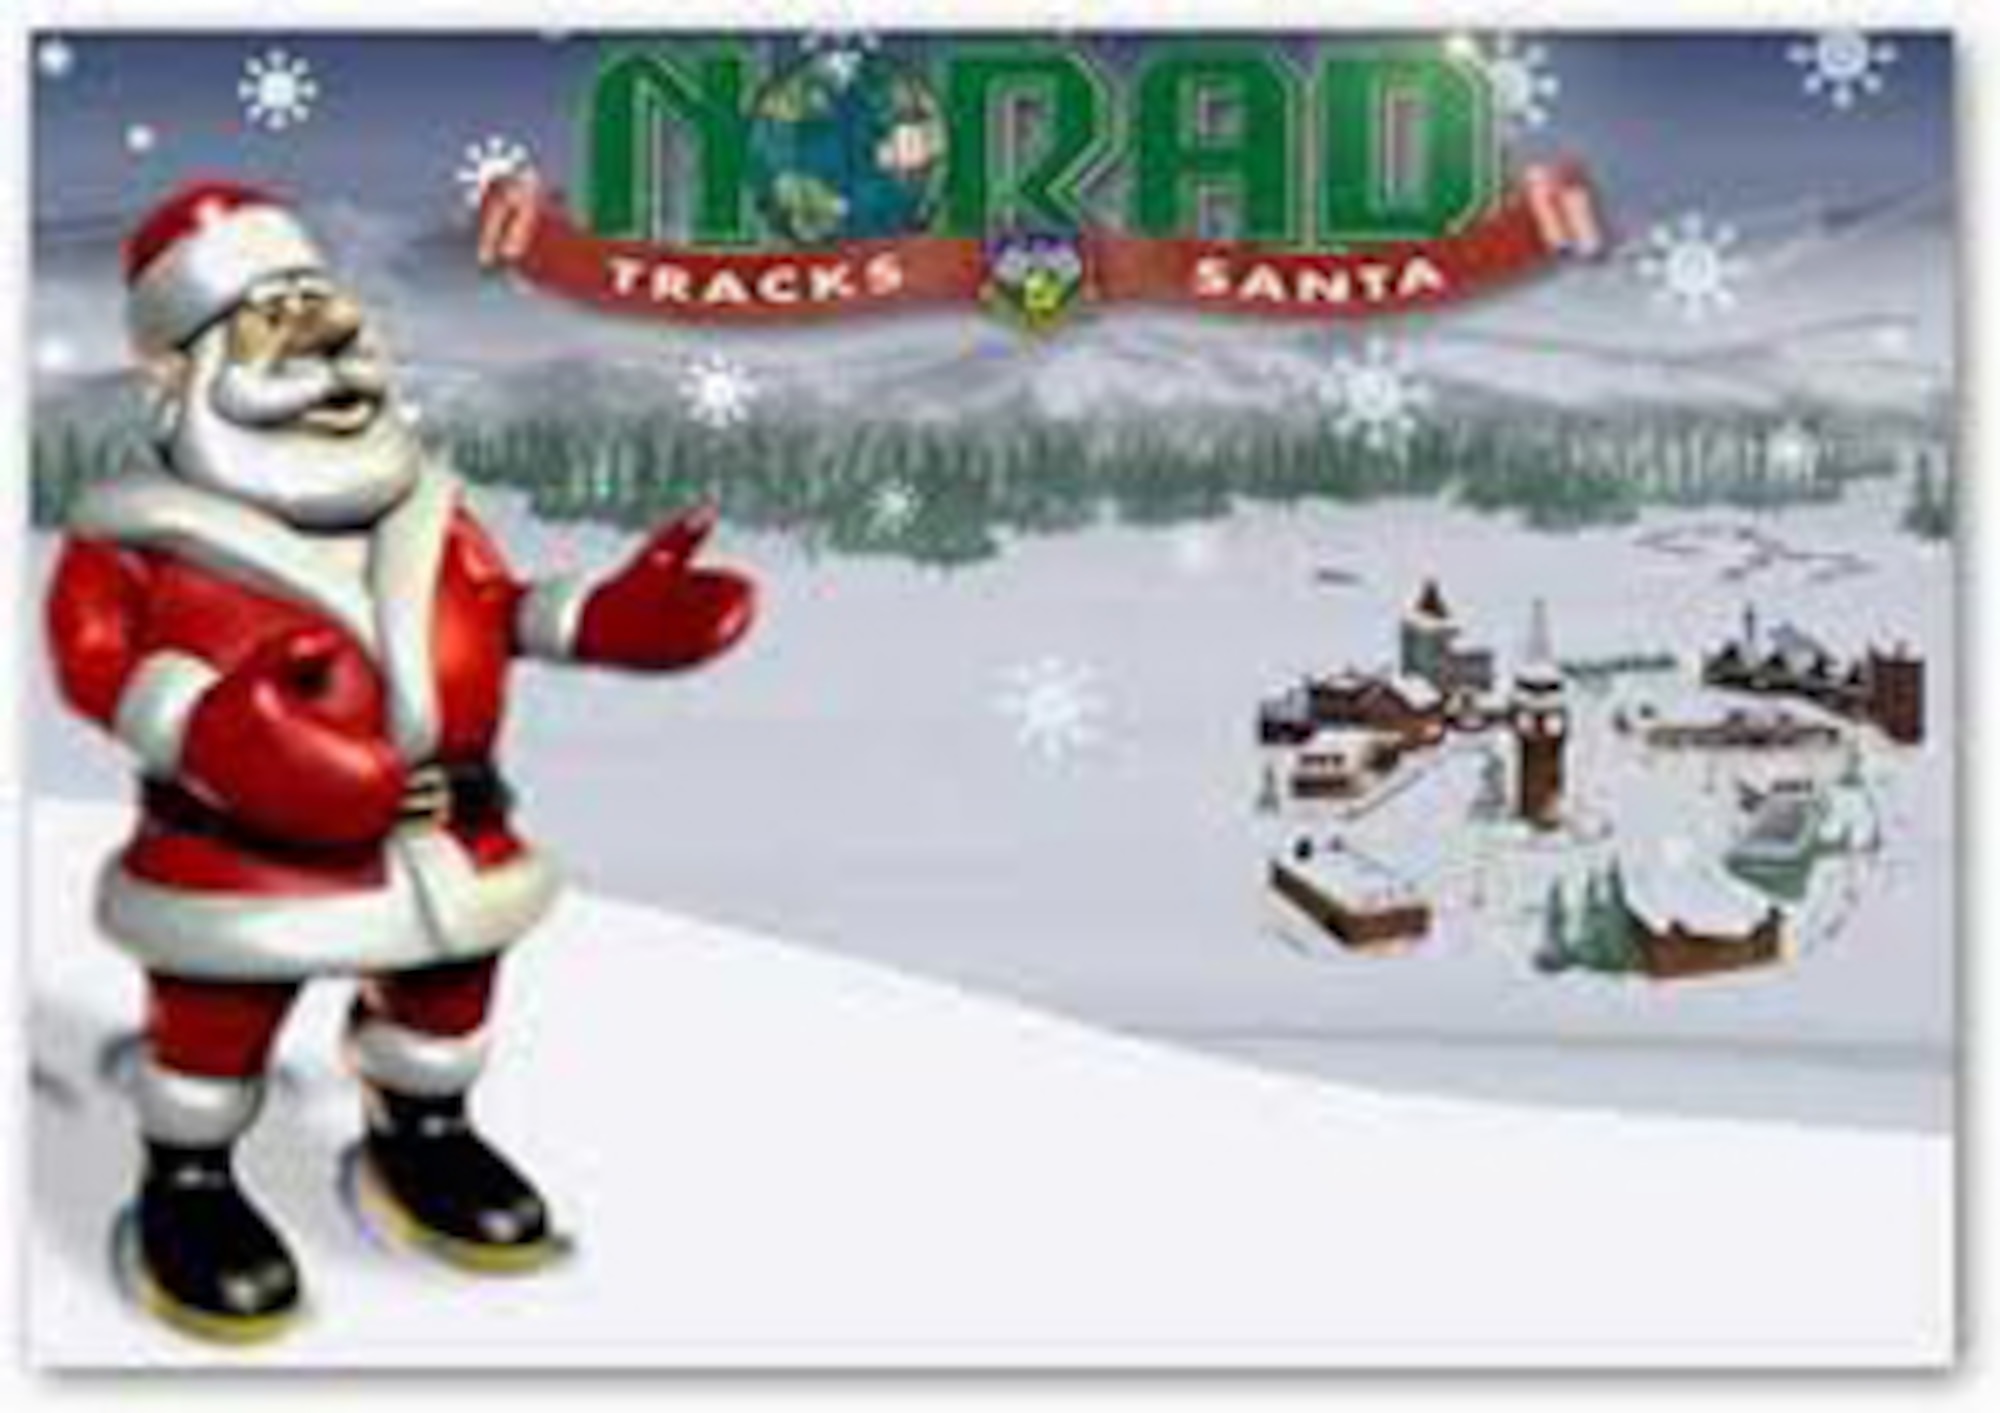 The "NORAD Tracks Santa" website at www.noradsanta.org is up and running. The site features a holiday countdown, games and daily activities, video messages from students around the world and more, officials said, and it is available in English, French, Spanish, German, Italian, Japanese, Portuguese and Chinese.